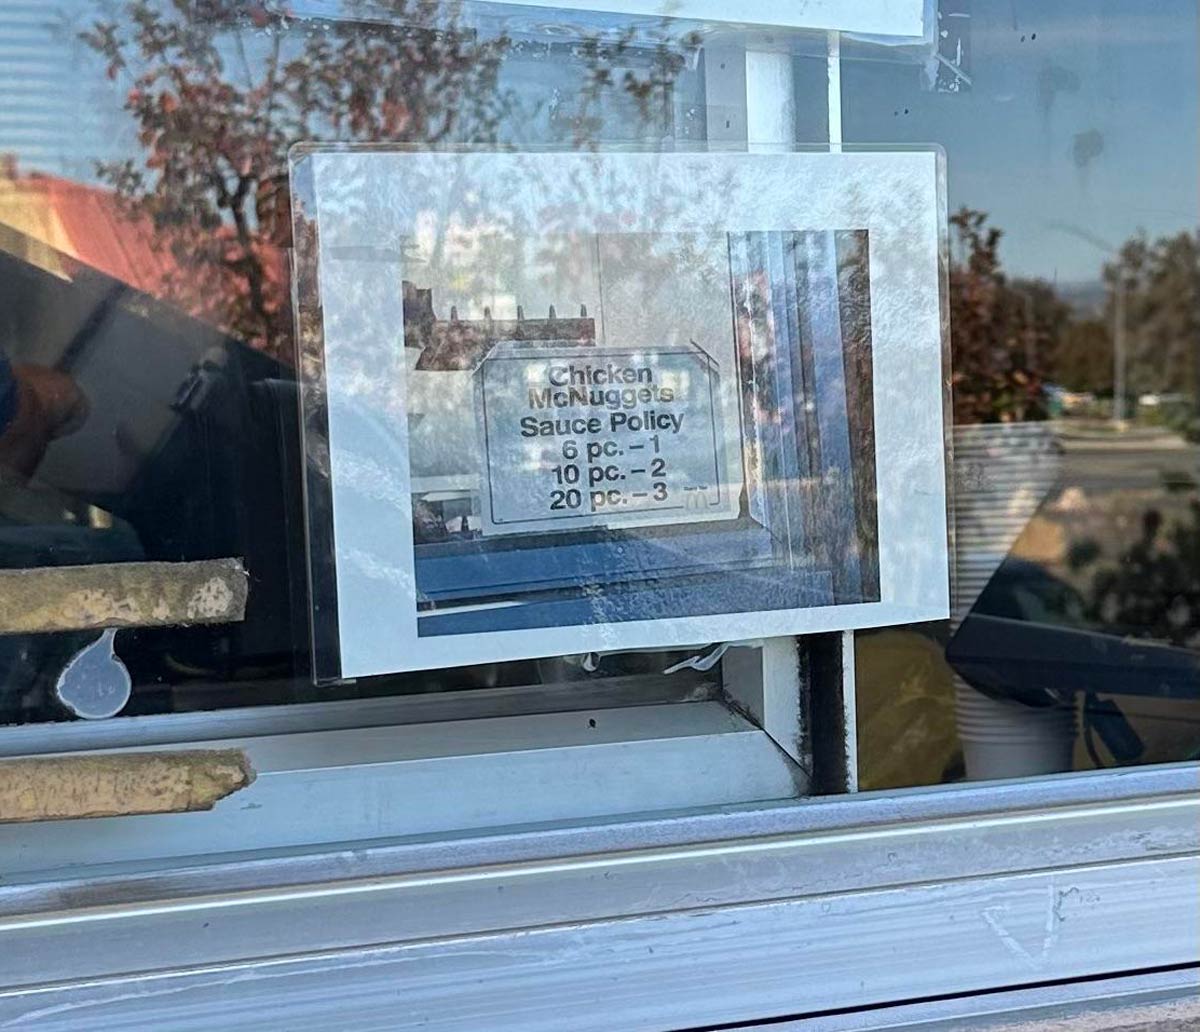 This McDonald’s taped their sauce policy on the drive thru window, which is a photo of their sauce policy, taped to their drive thru window